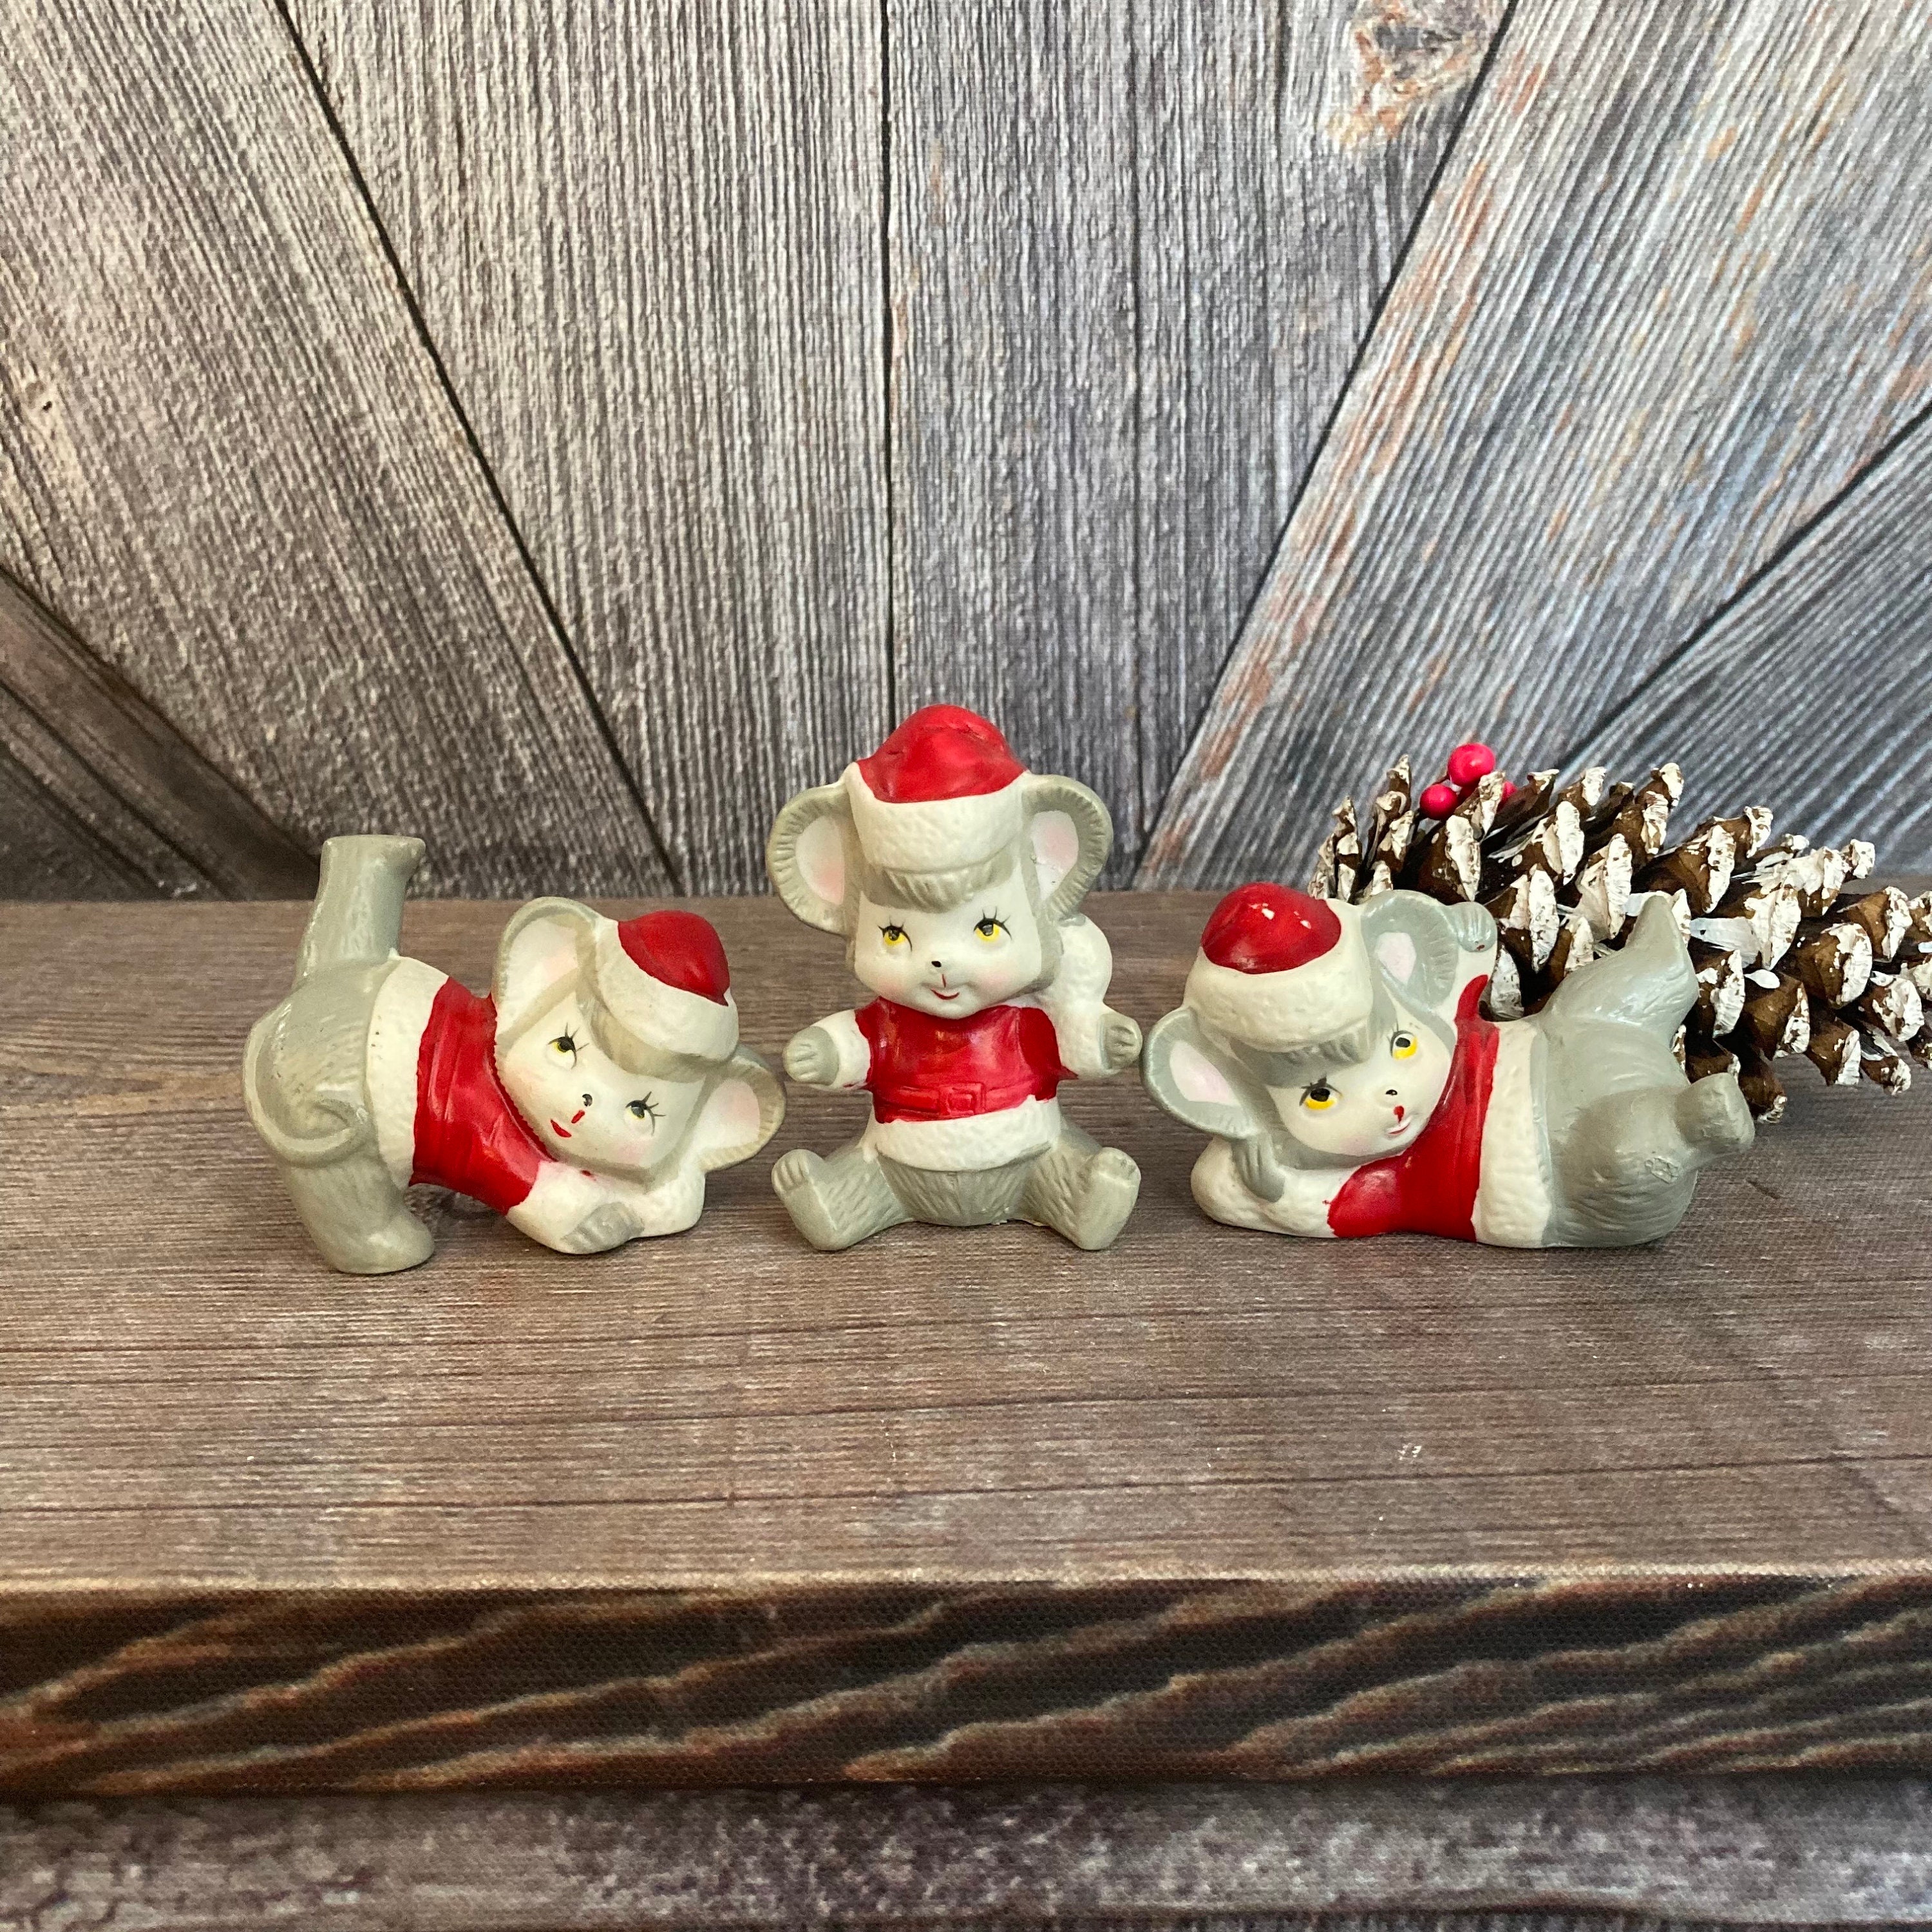  Holiday Mice Ceramic Bisque Christmas Tree Ornaments 5 pc Set  Ready to Paint : Handmade Products